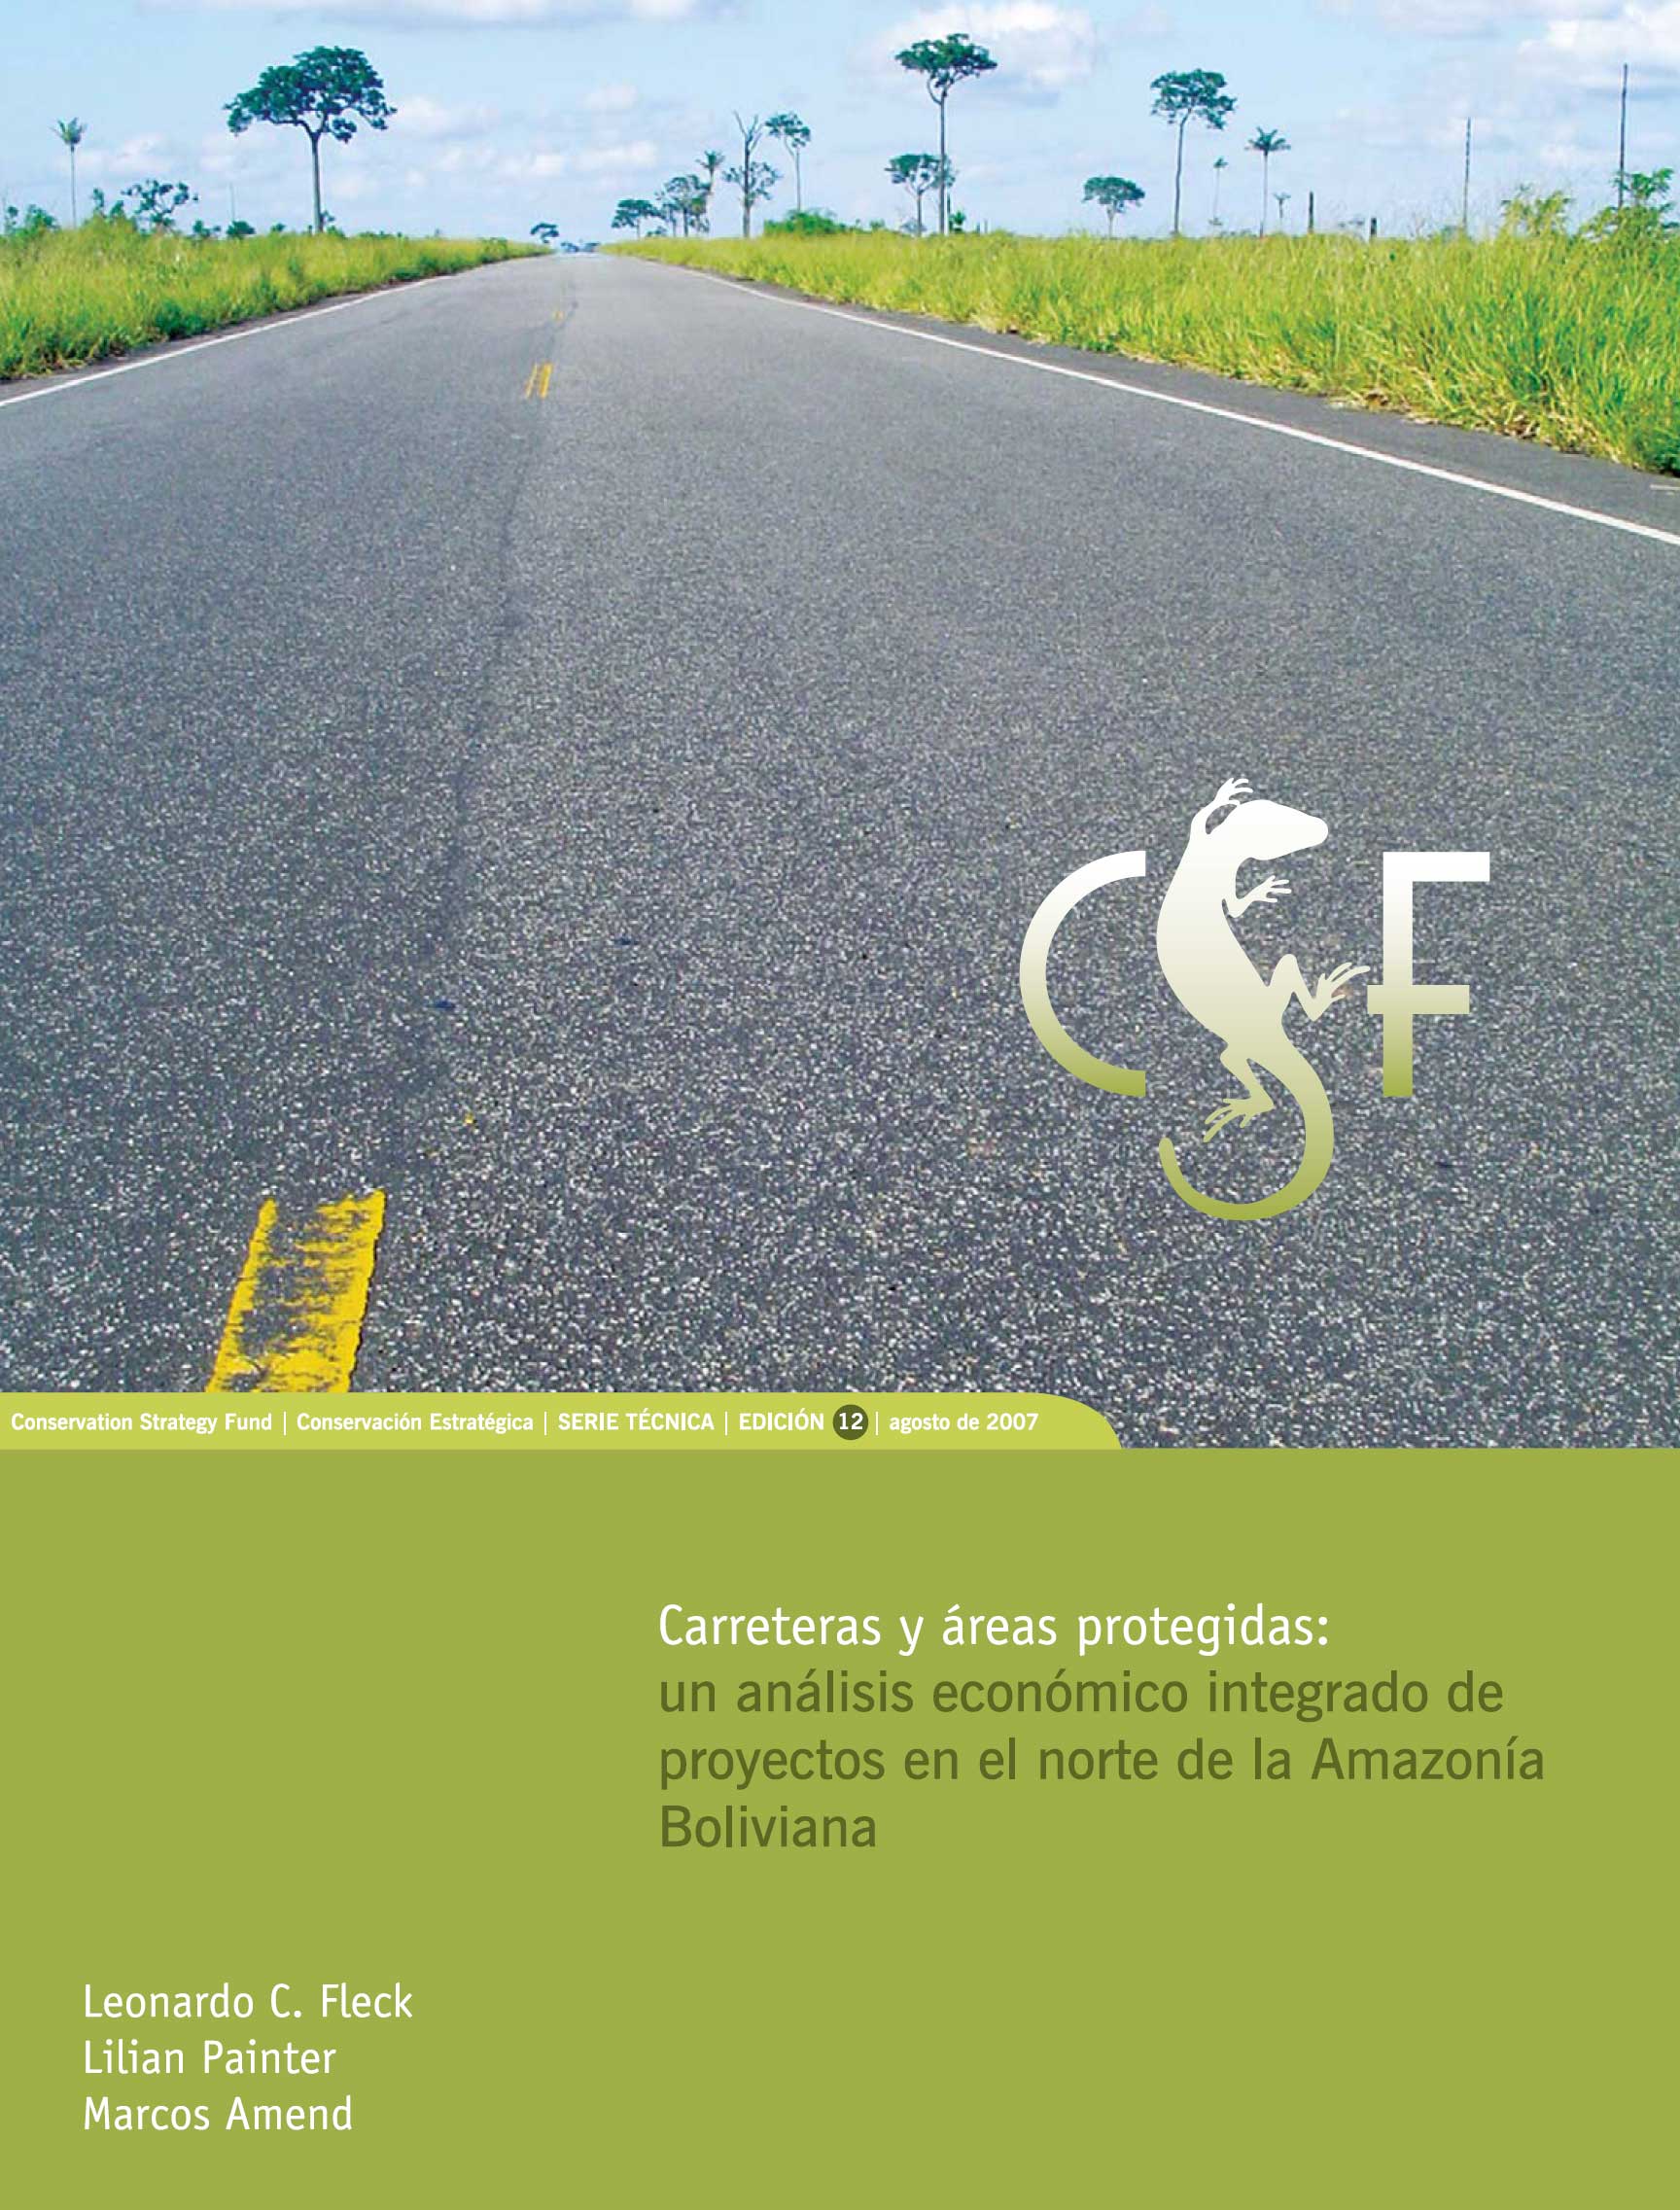 Front cover of report showing close up of road through cleared amazon forest